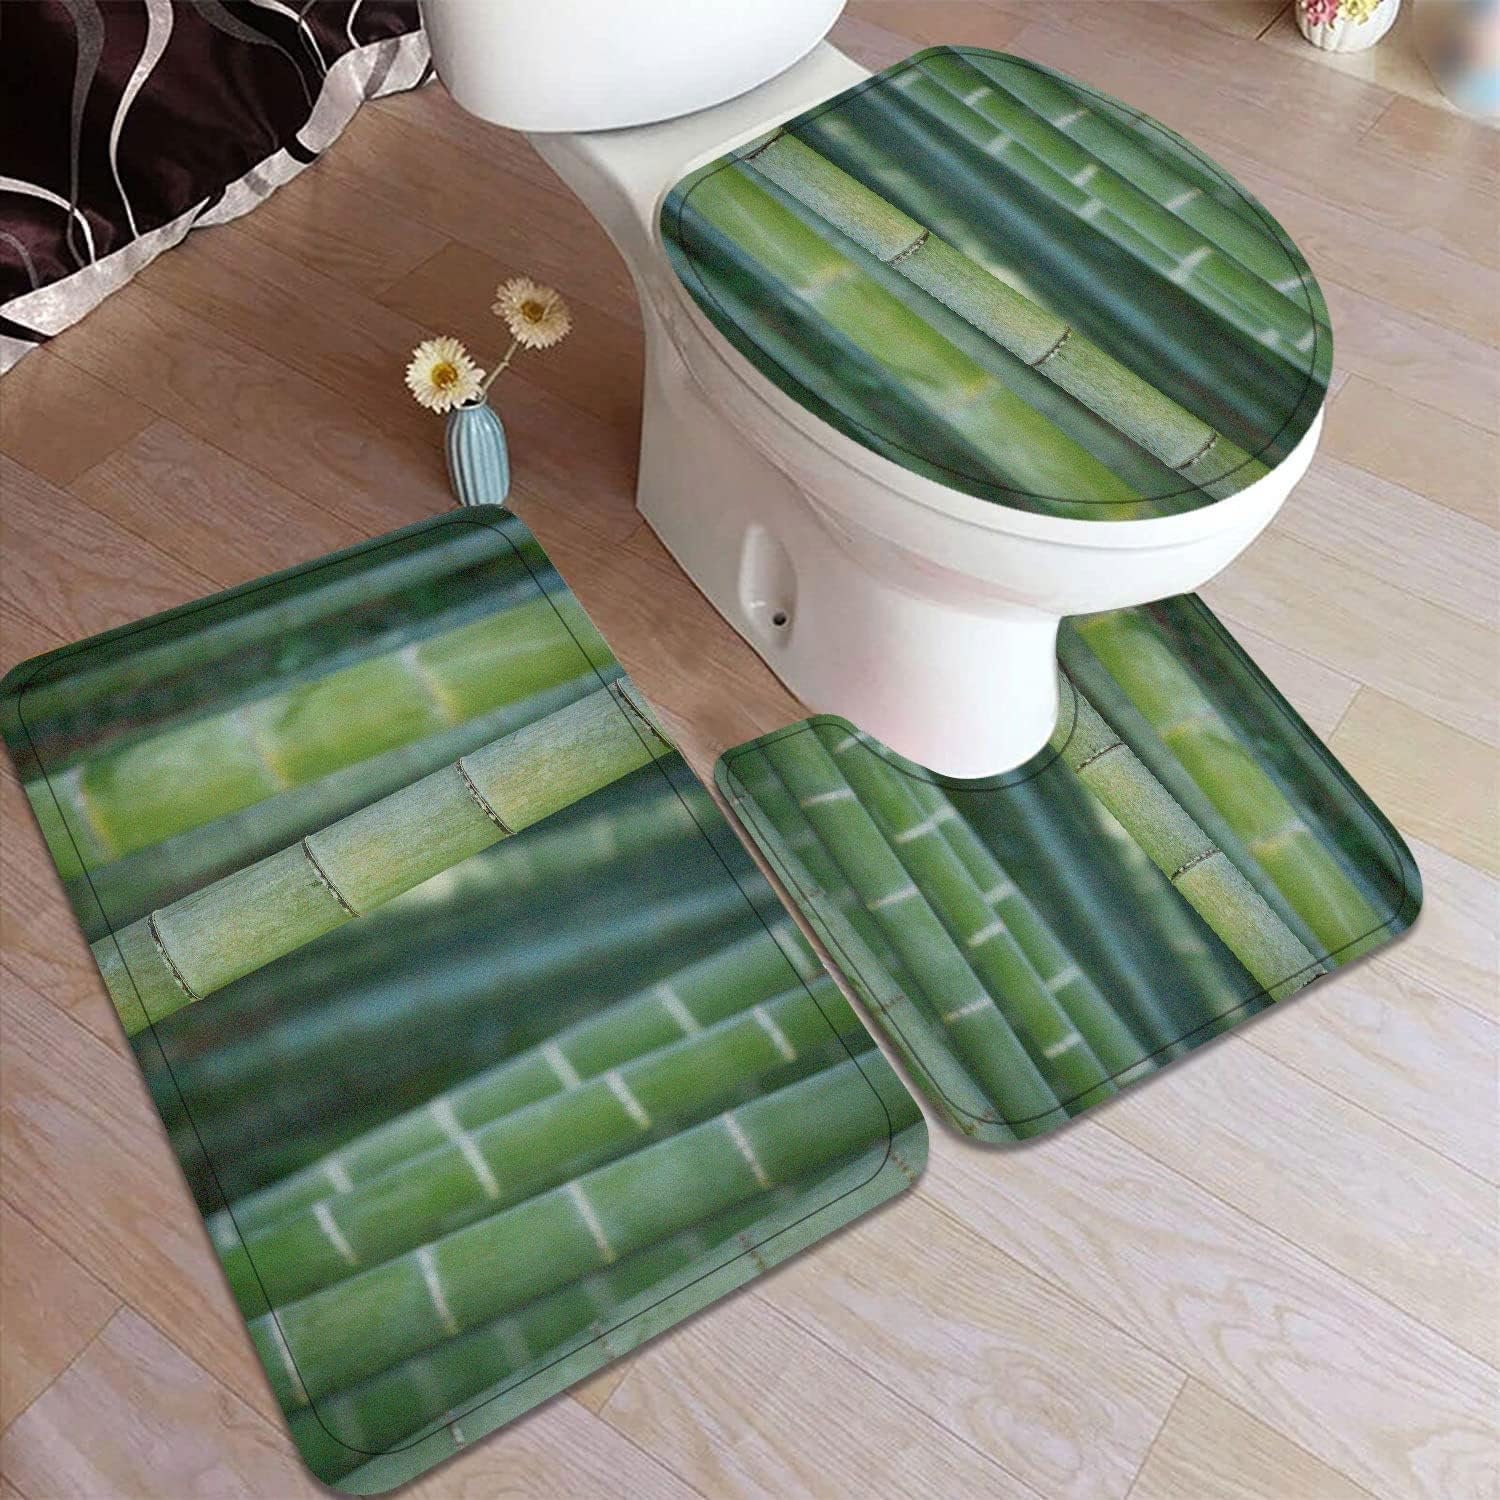 Bamboo Bath Rug, Toilet Seat Cover Green Bamboo Forest Plant Pattern